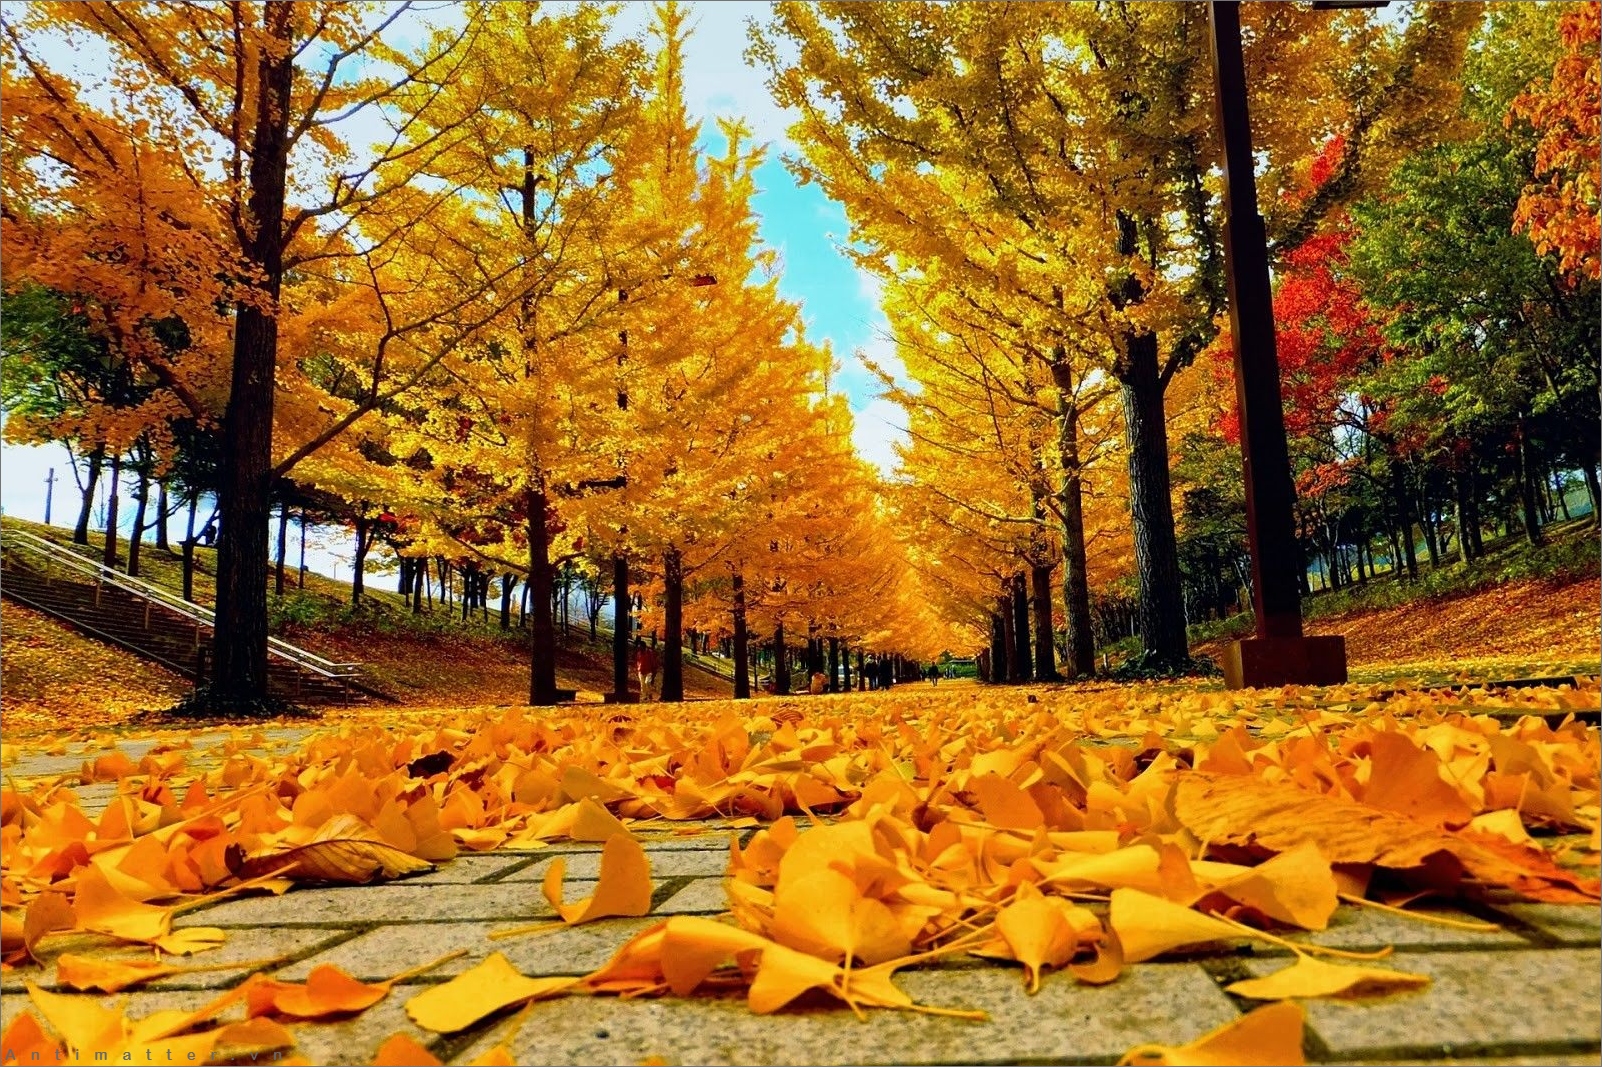 99+ Pictures of Beautiful, Sad Autumn Falling Yellow Leaves Containing Thoughts